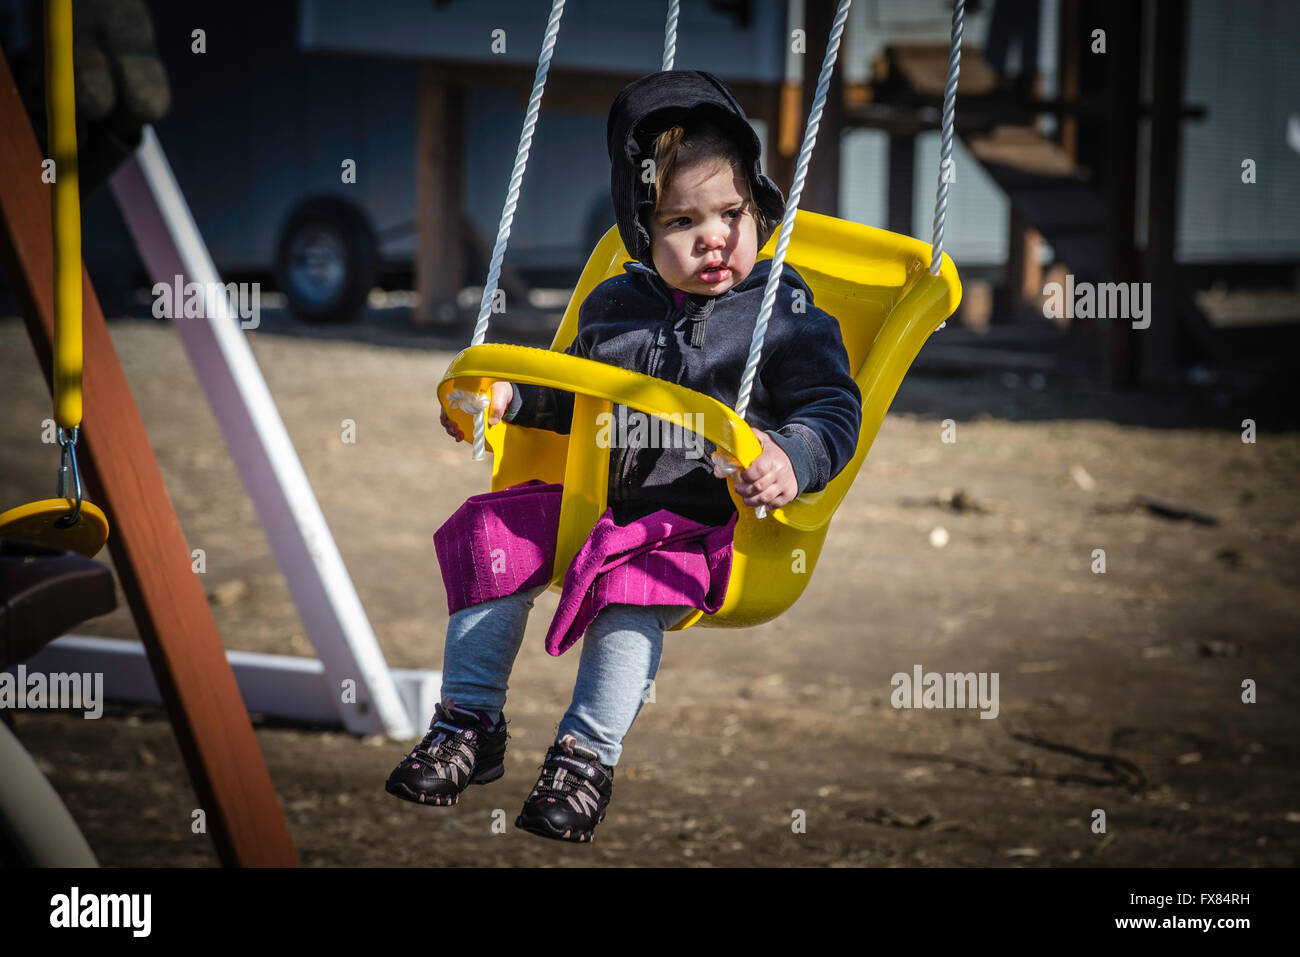 Amish Girl On Swing High Resolution Stock Photography and Images - Alamy